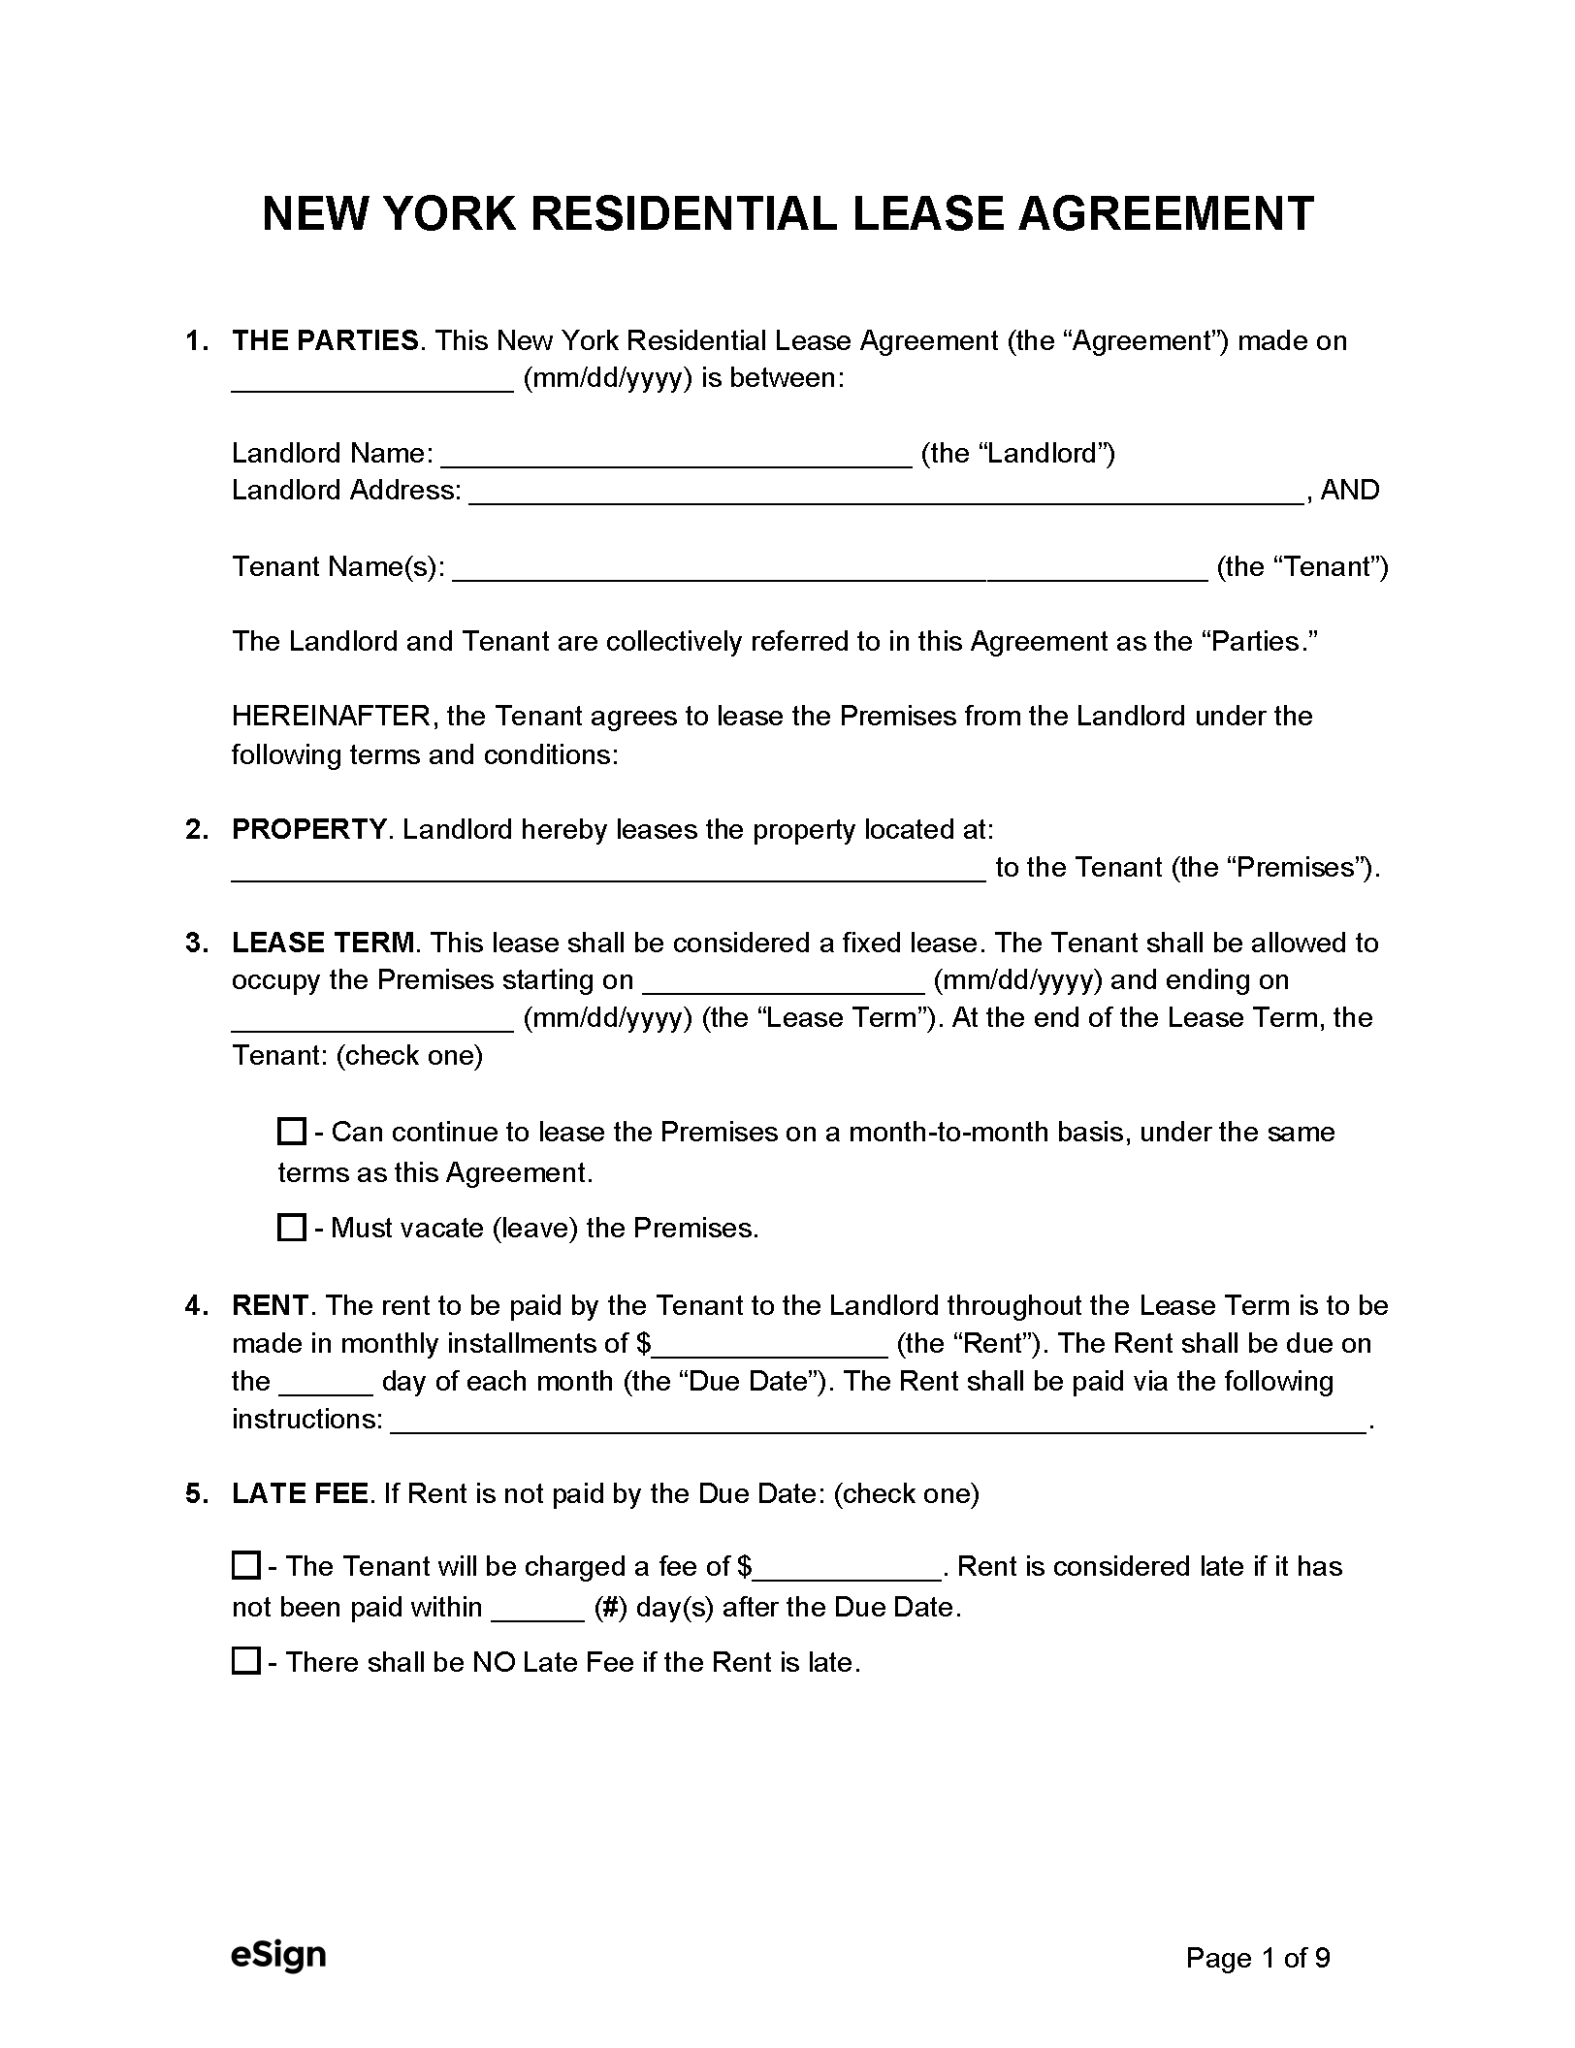 free-louisiana-standard-residential-lease-agreement-template-pdf